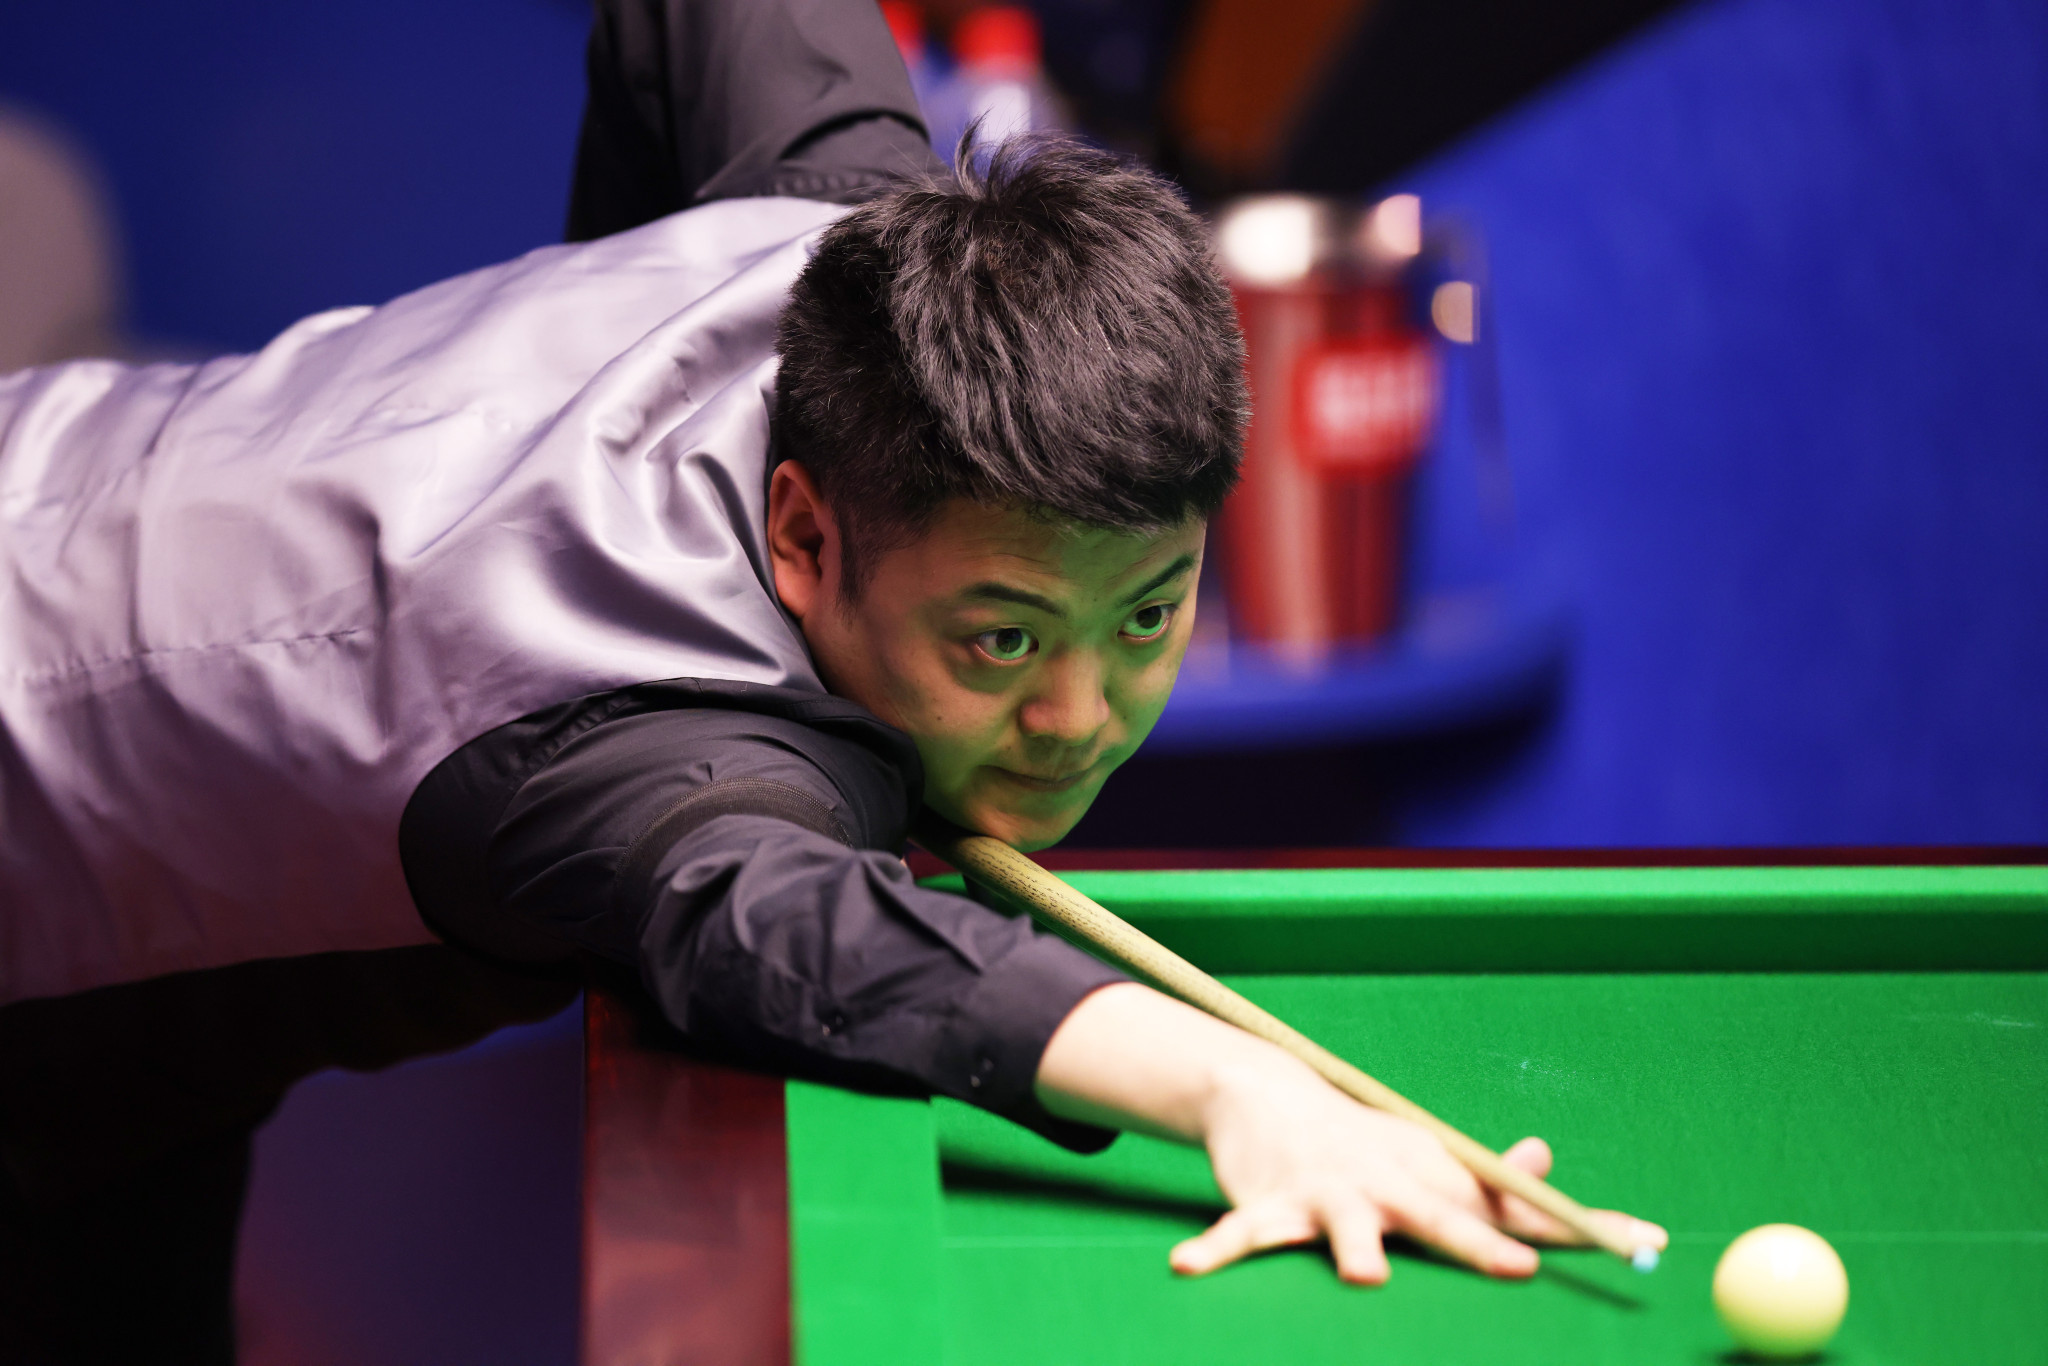 Wenbo and Hang receive life bans from snooker for match-fixing offences